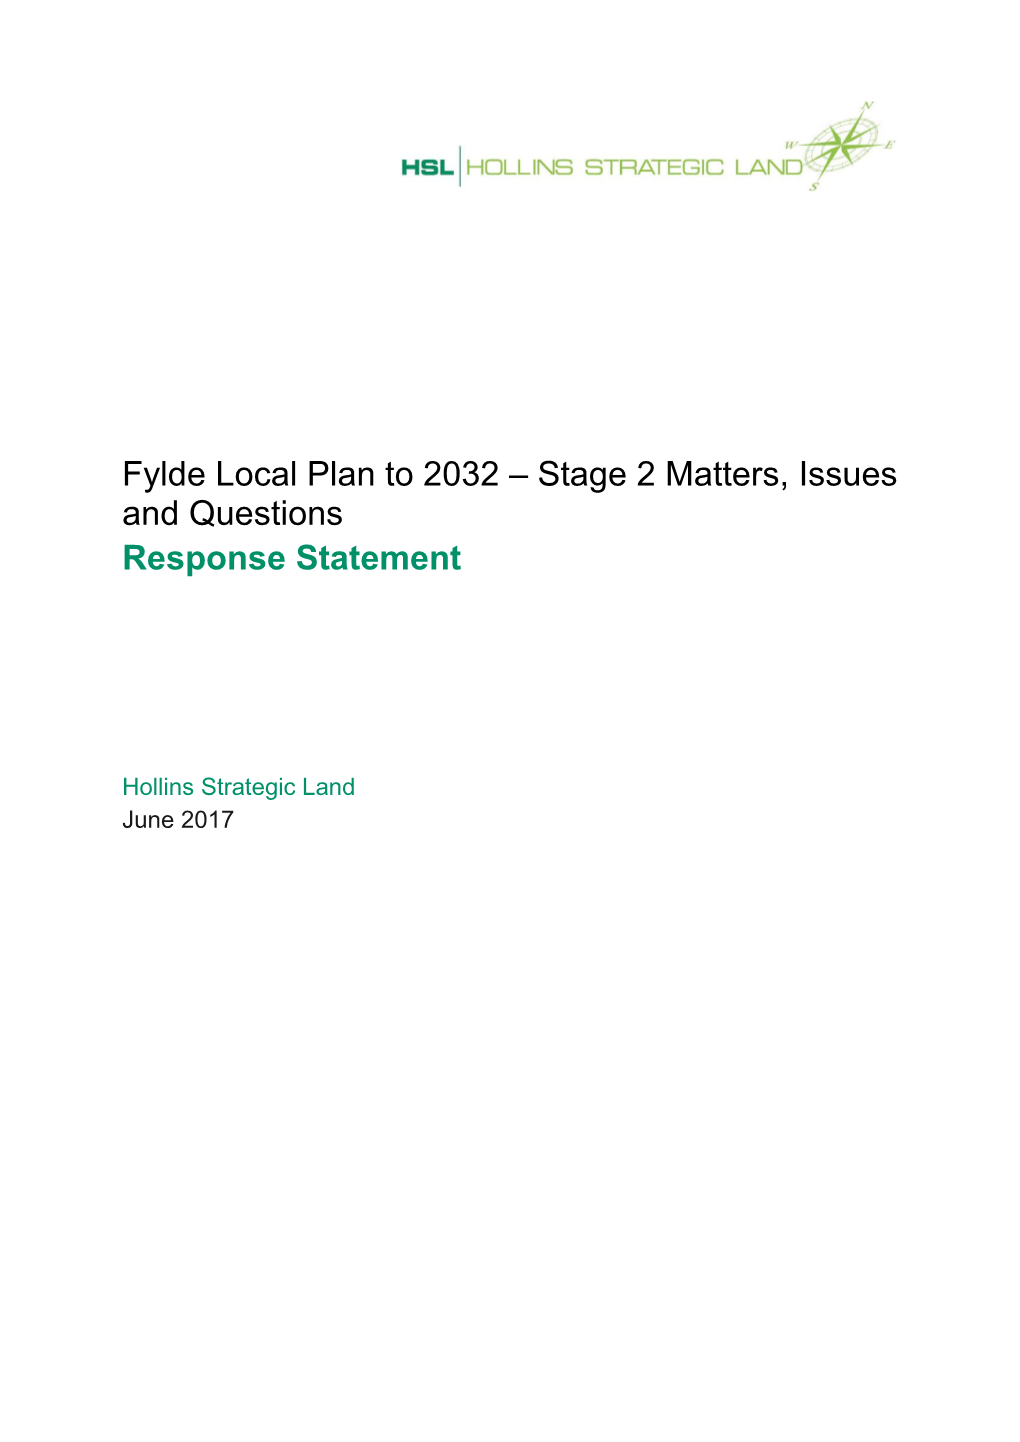 Fylde Local Plan to 2032 – Stage 2 Matters, Issues and Questions Response Statement